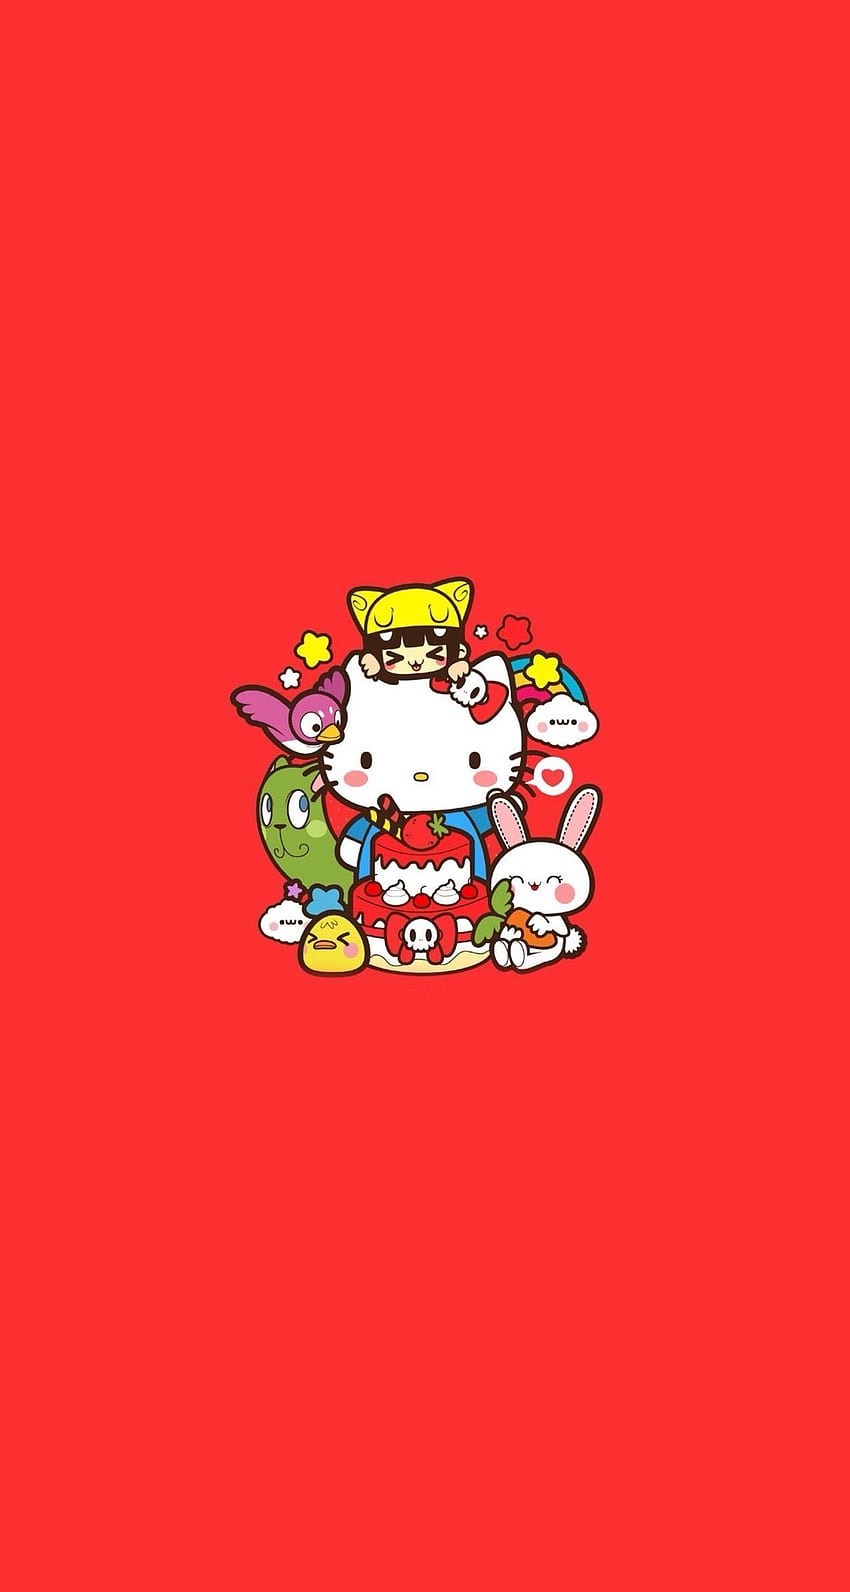 Cute Hello Kitty  Grey And Red Background Wallpaper Download  MobCup